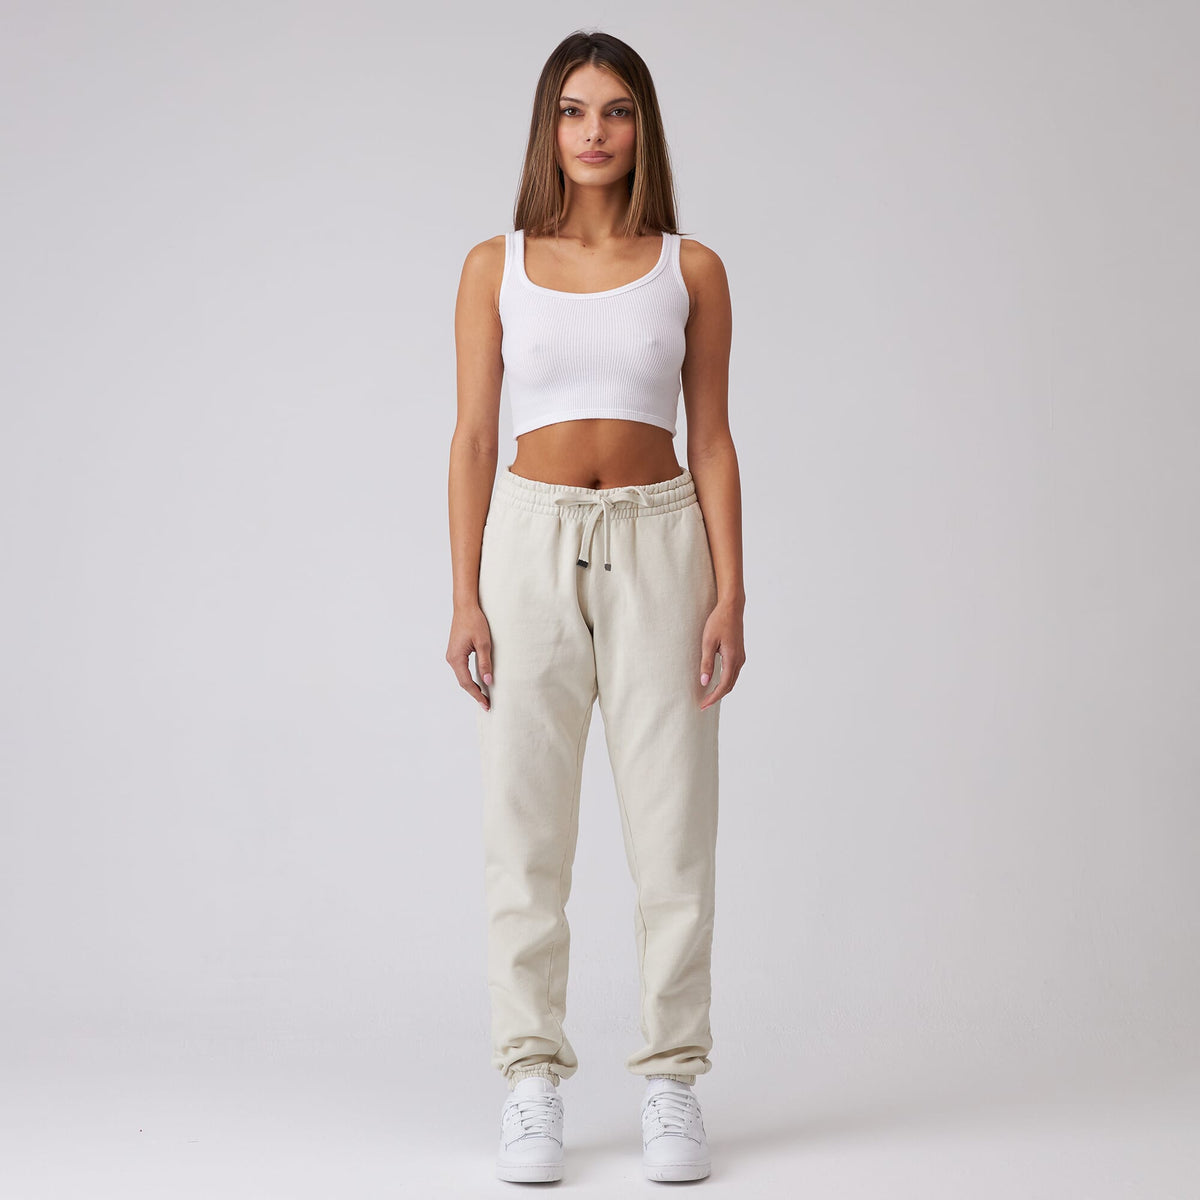 The Best White Sweatpants Womens